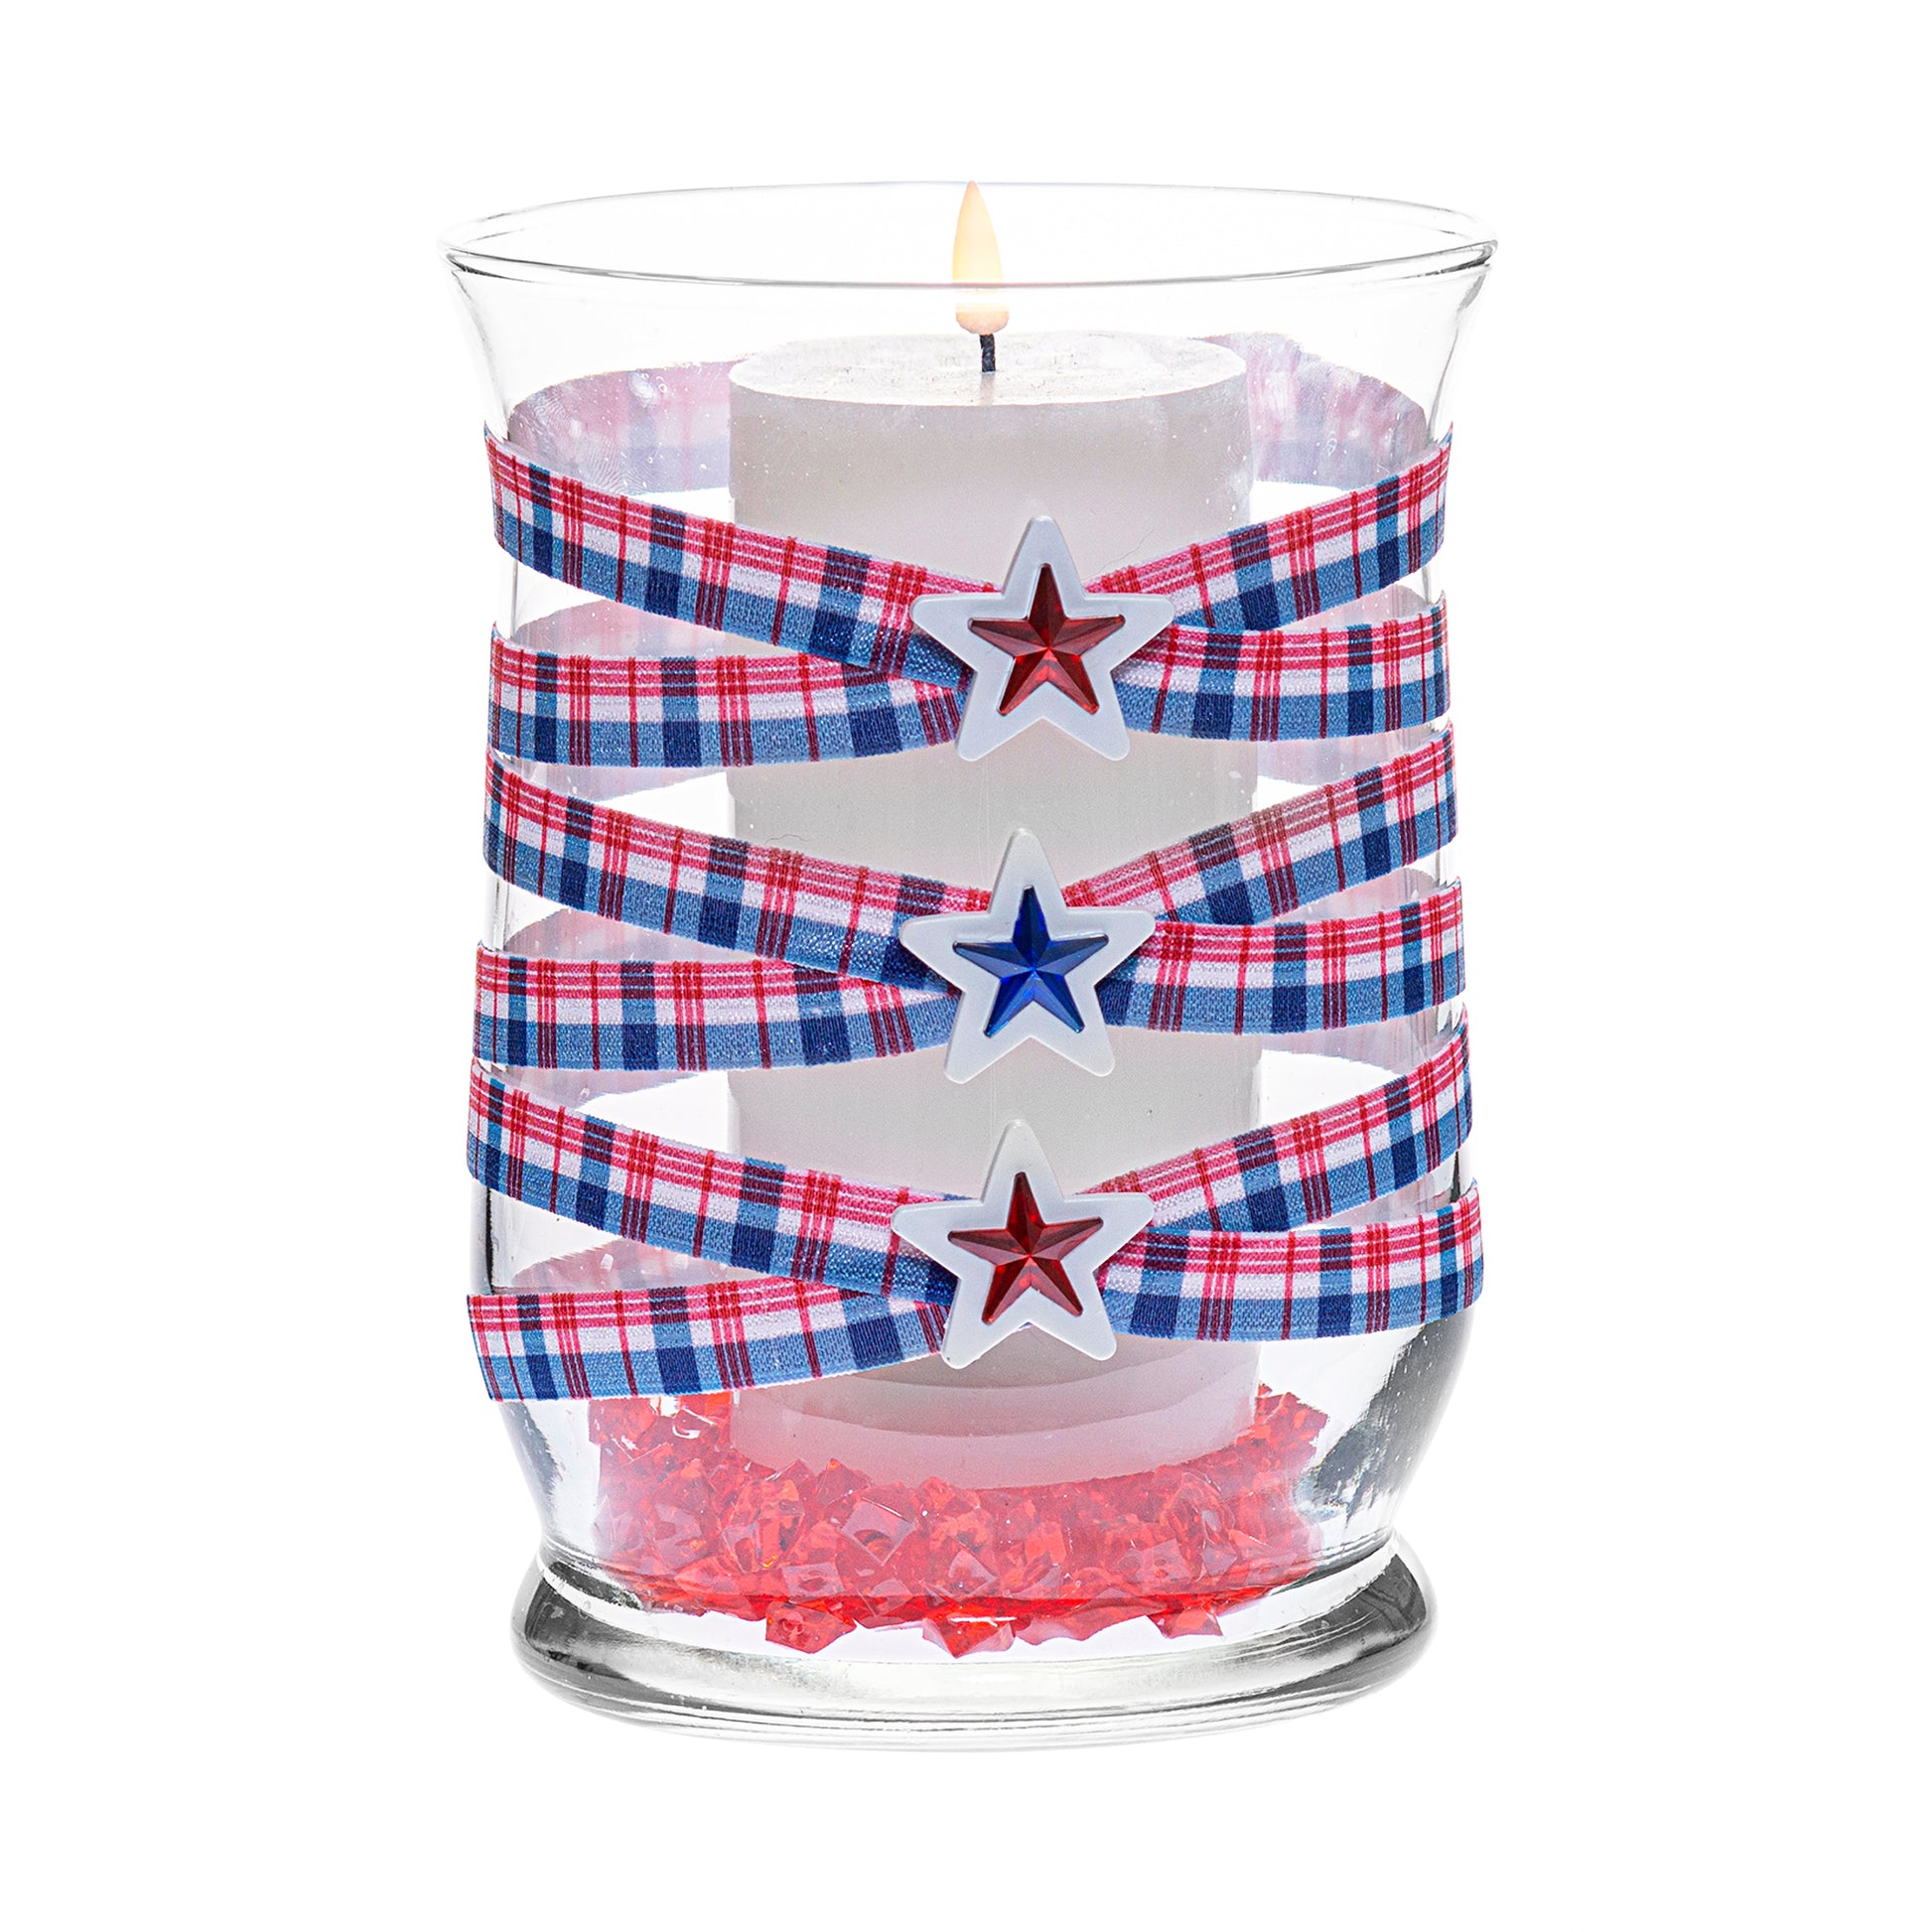 Front of Glass Wrappings 8" hurricane vase wrapped in red, white, and blue plaid elastic, decorated with red and blue gem stars. It holds a white candle.